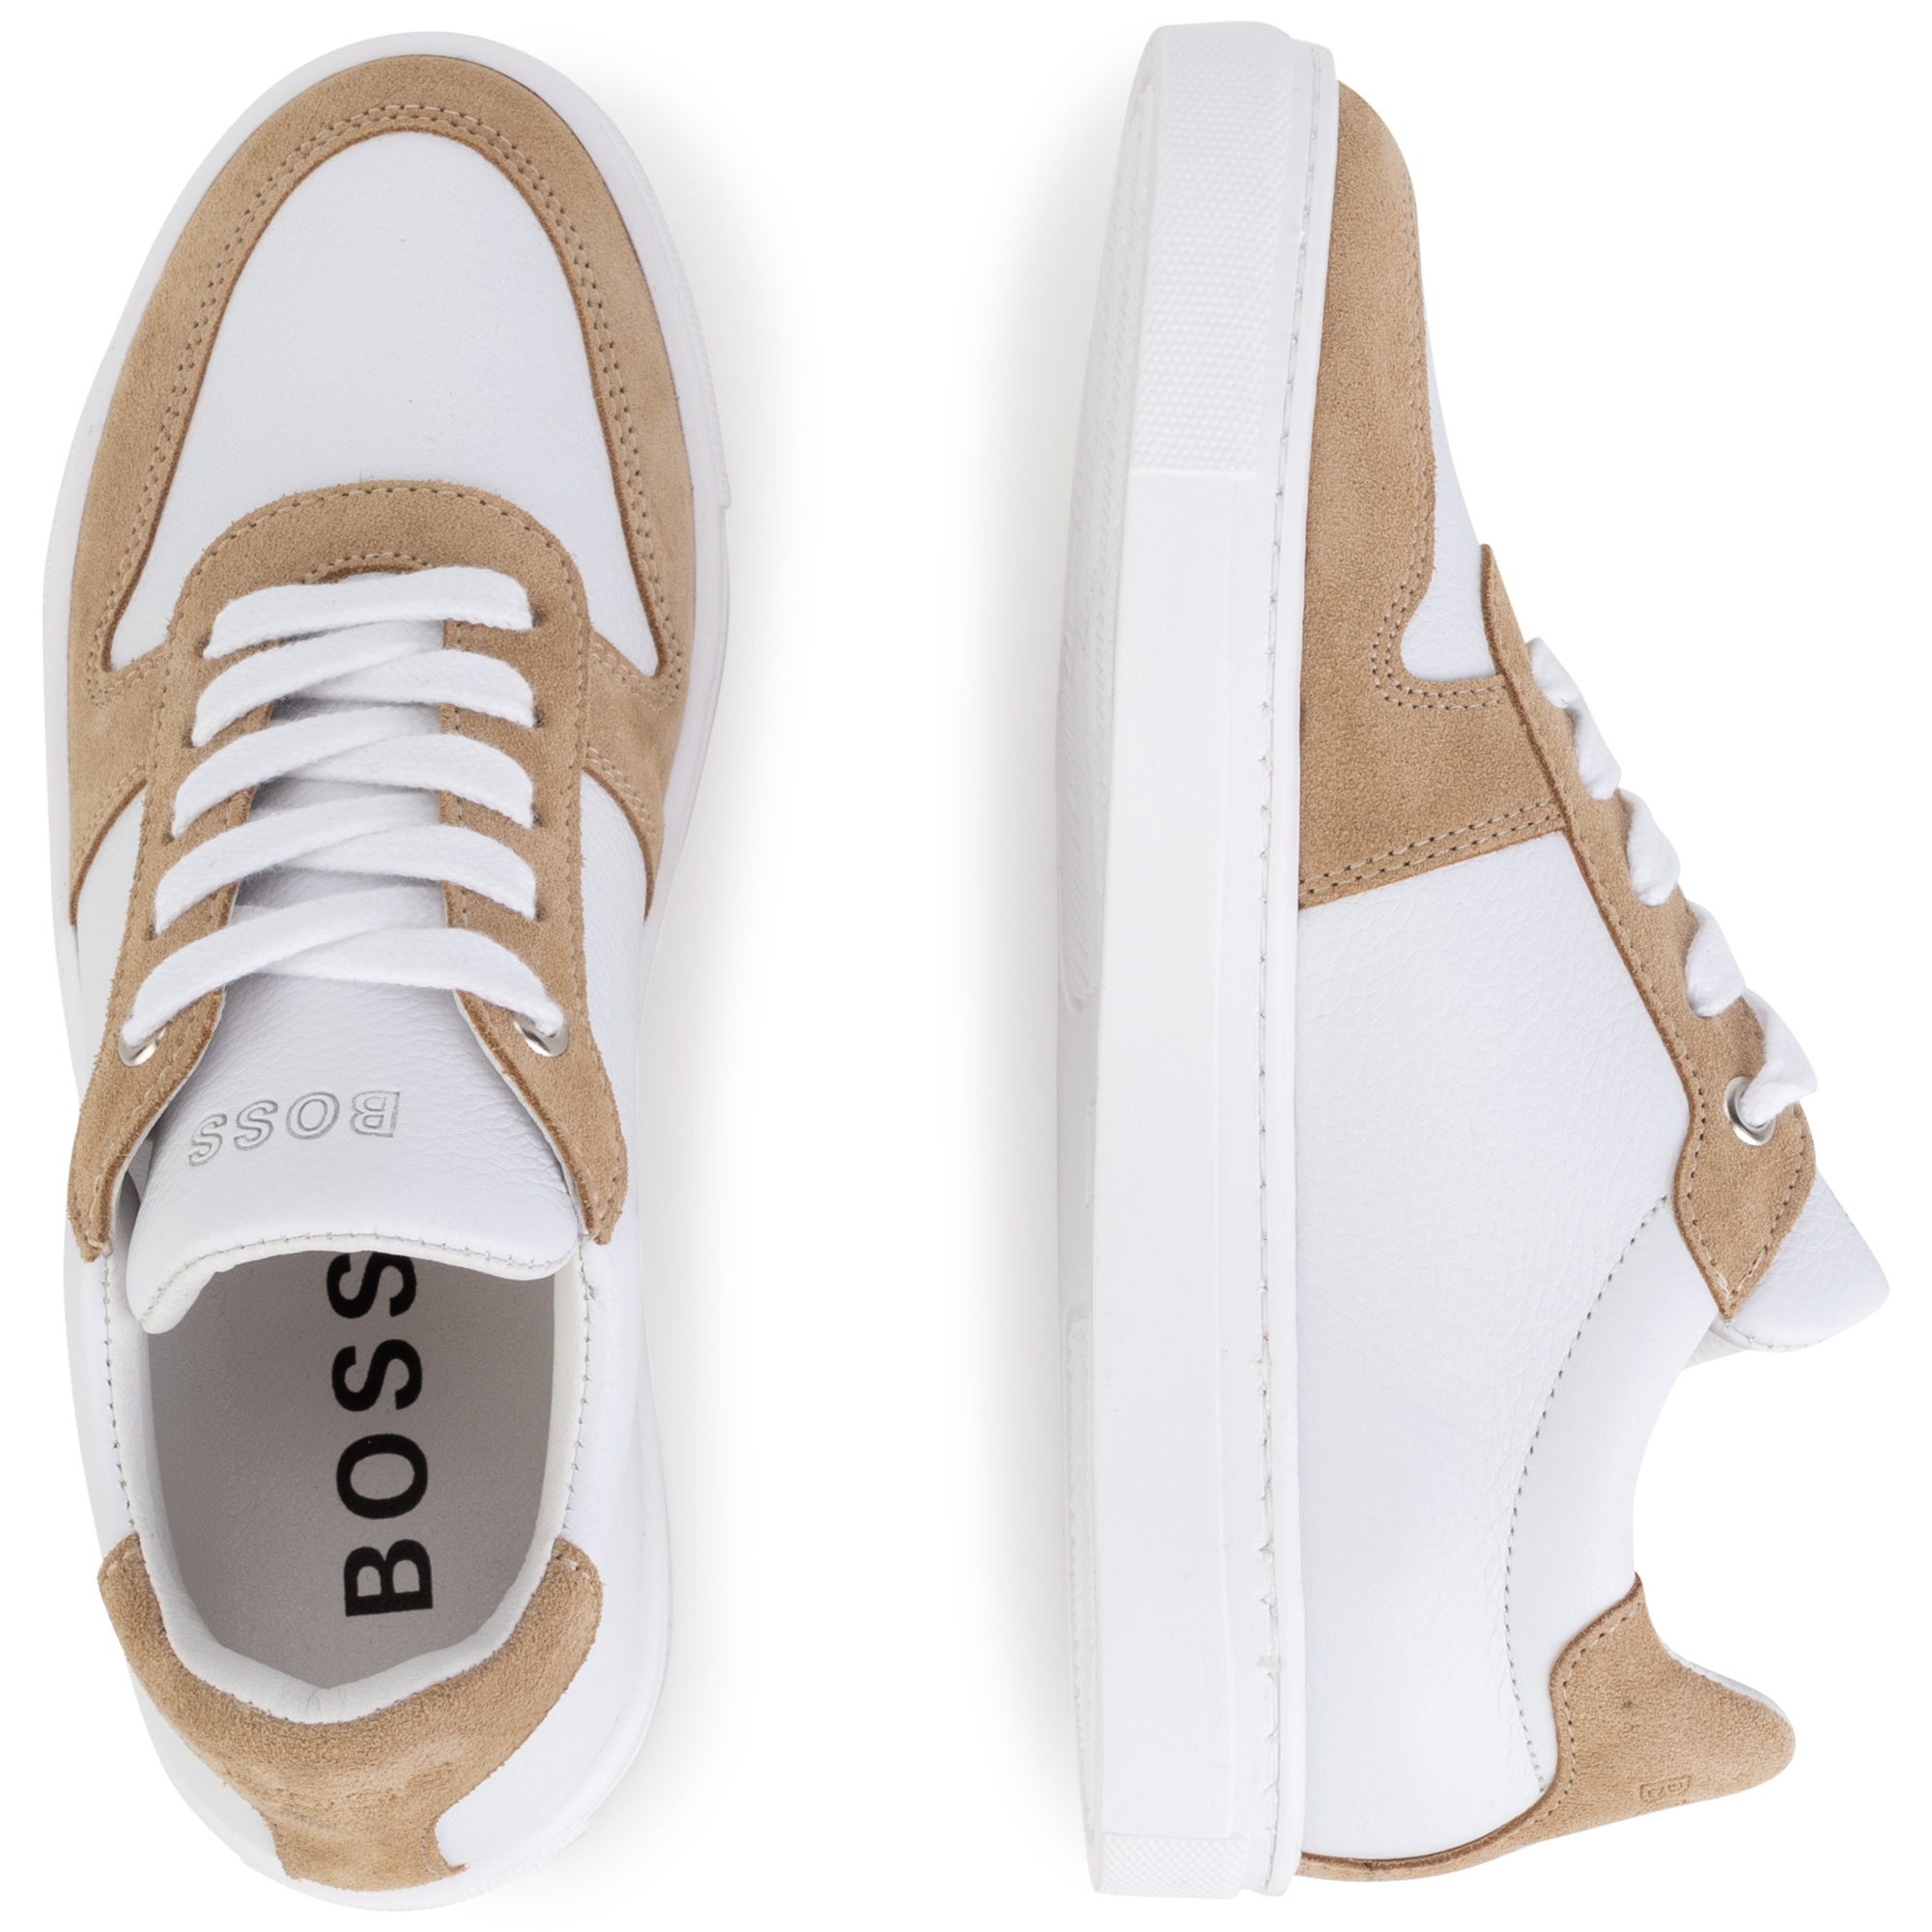 Hugo Boss White and Beige Sneakers